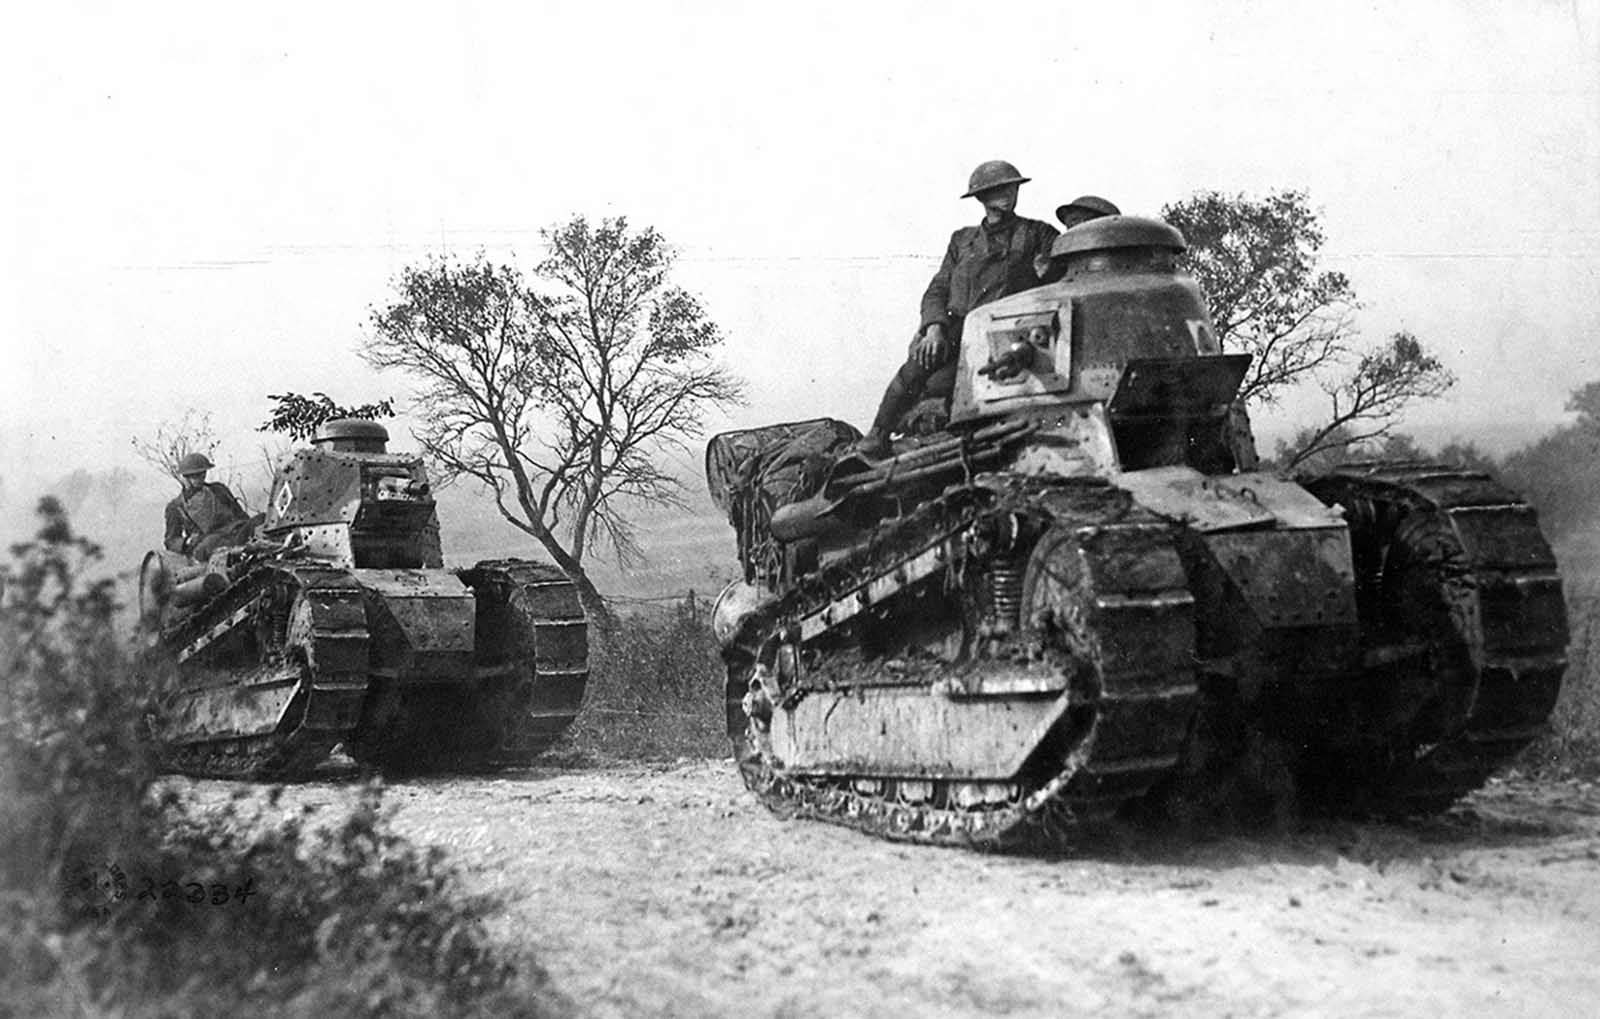 American troops aboard French-built Renault FT-17 tanks head for the front line in the Forest of Argonne, France, on September 26, 1918